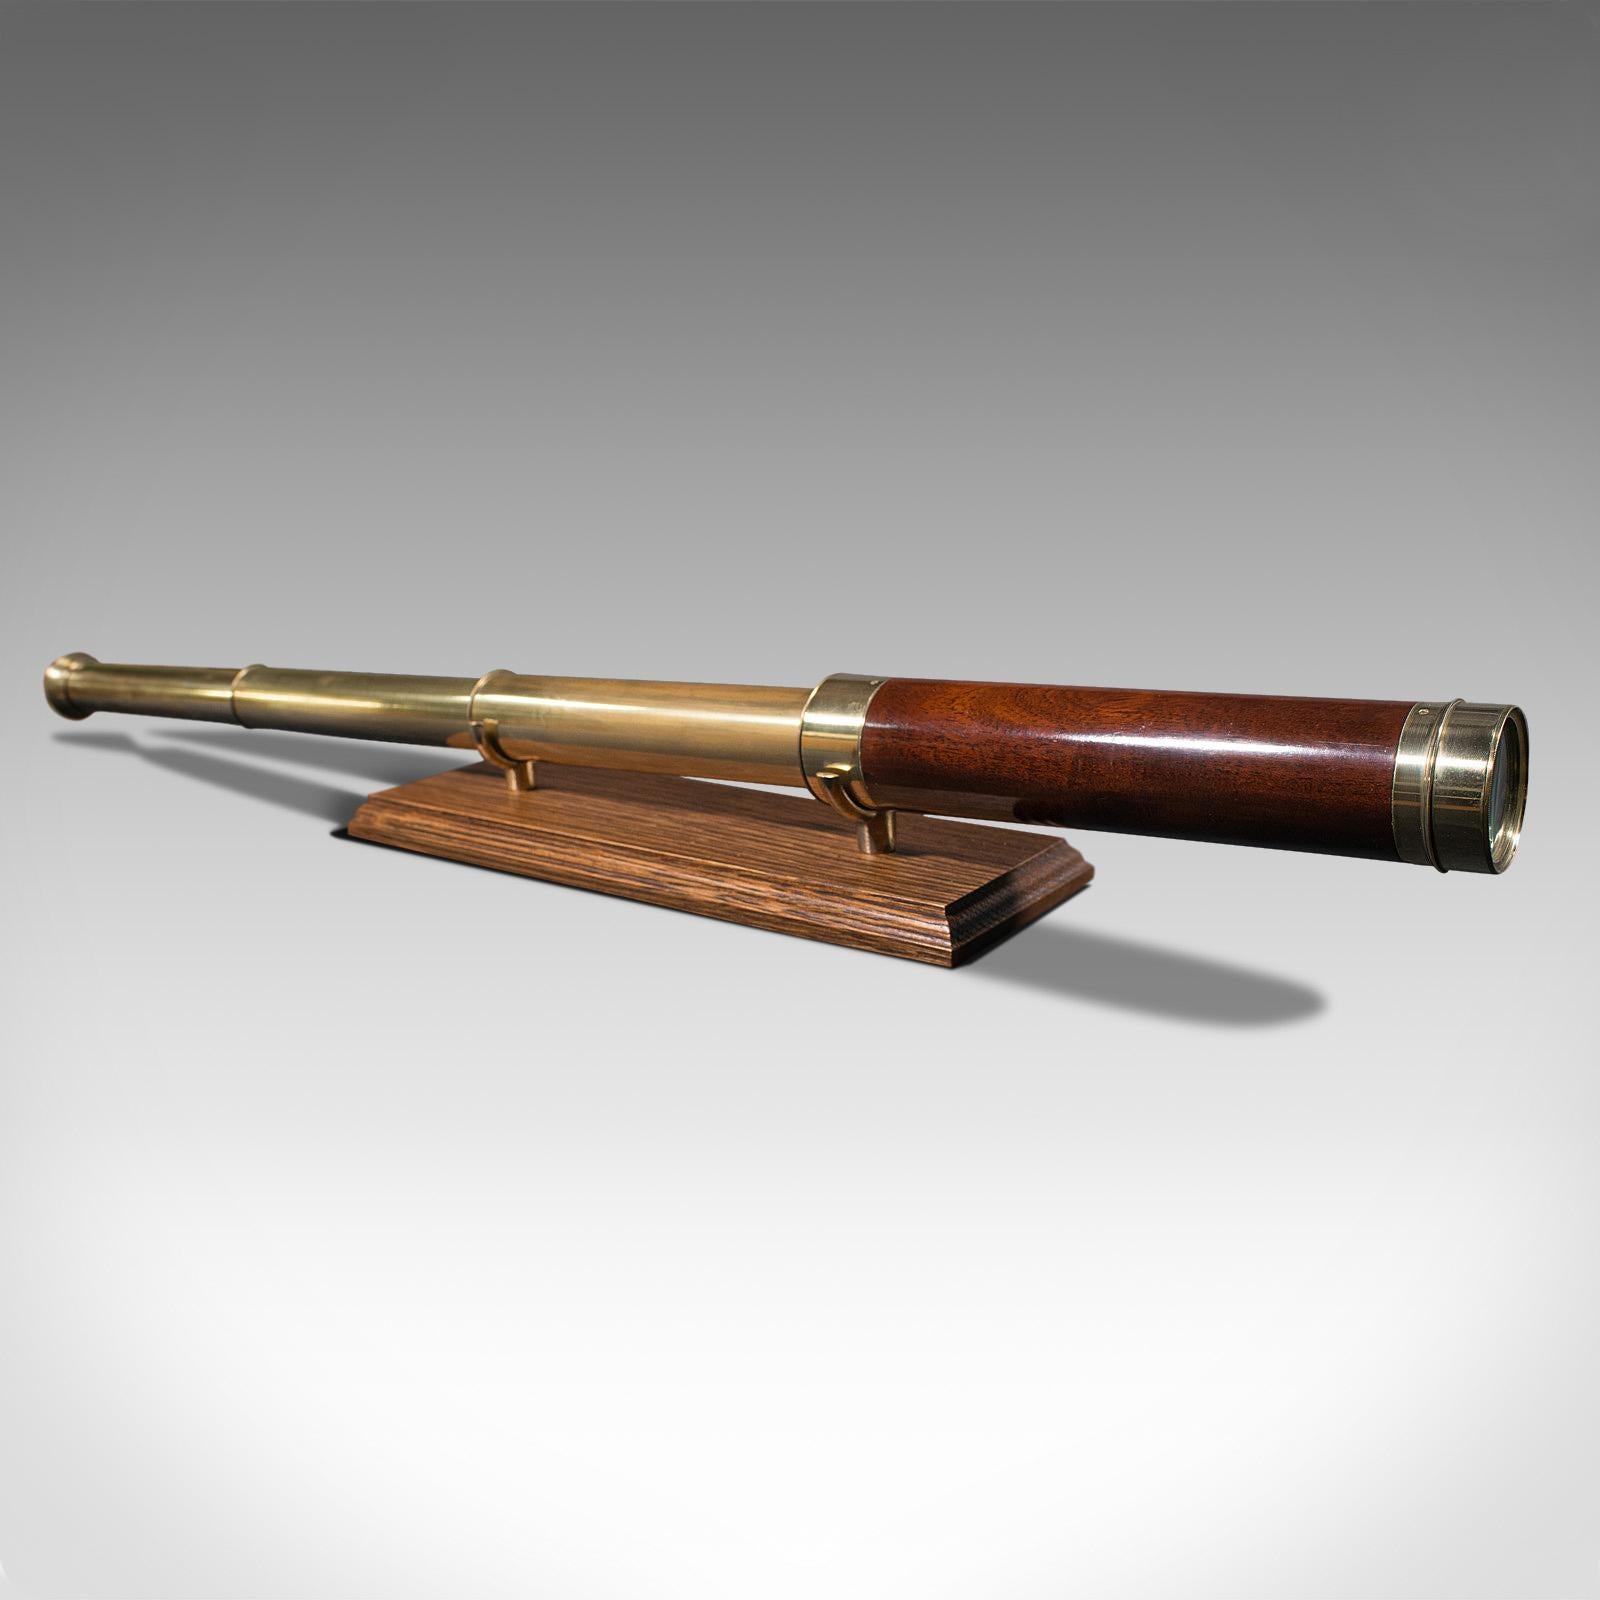 This is an antique 3-draw telescope. An English, mahogany and brass terrestrial and astronomical refractor, dating to the Victorian period, circa 1880.

Perfect for bird watching, landscape appreciation, wildlife, or maritime observation. Equally